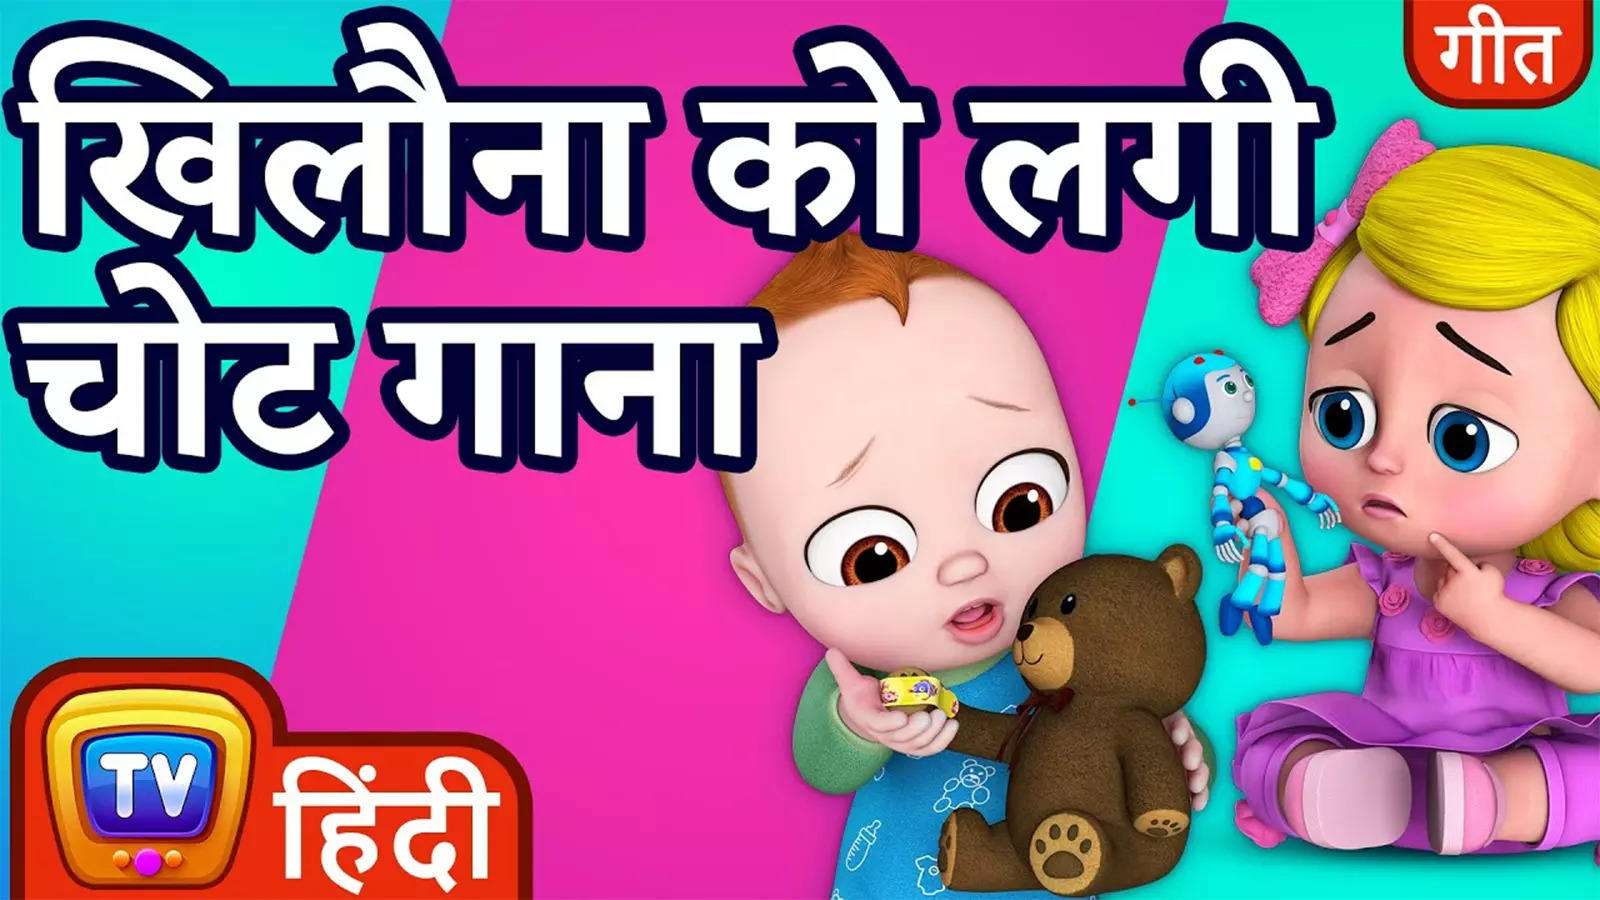 Watch Popular Children Hindi Nursery Rhyme 'Toy Gets A Boo Boo' For Kids -  Check Out Fun Kids Nursery Rhymes And Baby Songs In Hindi | Entertainment -  Times of India Videos